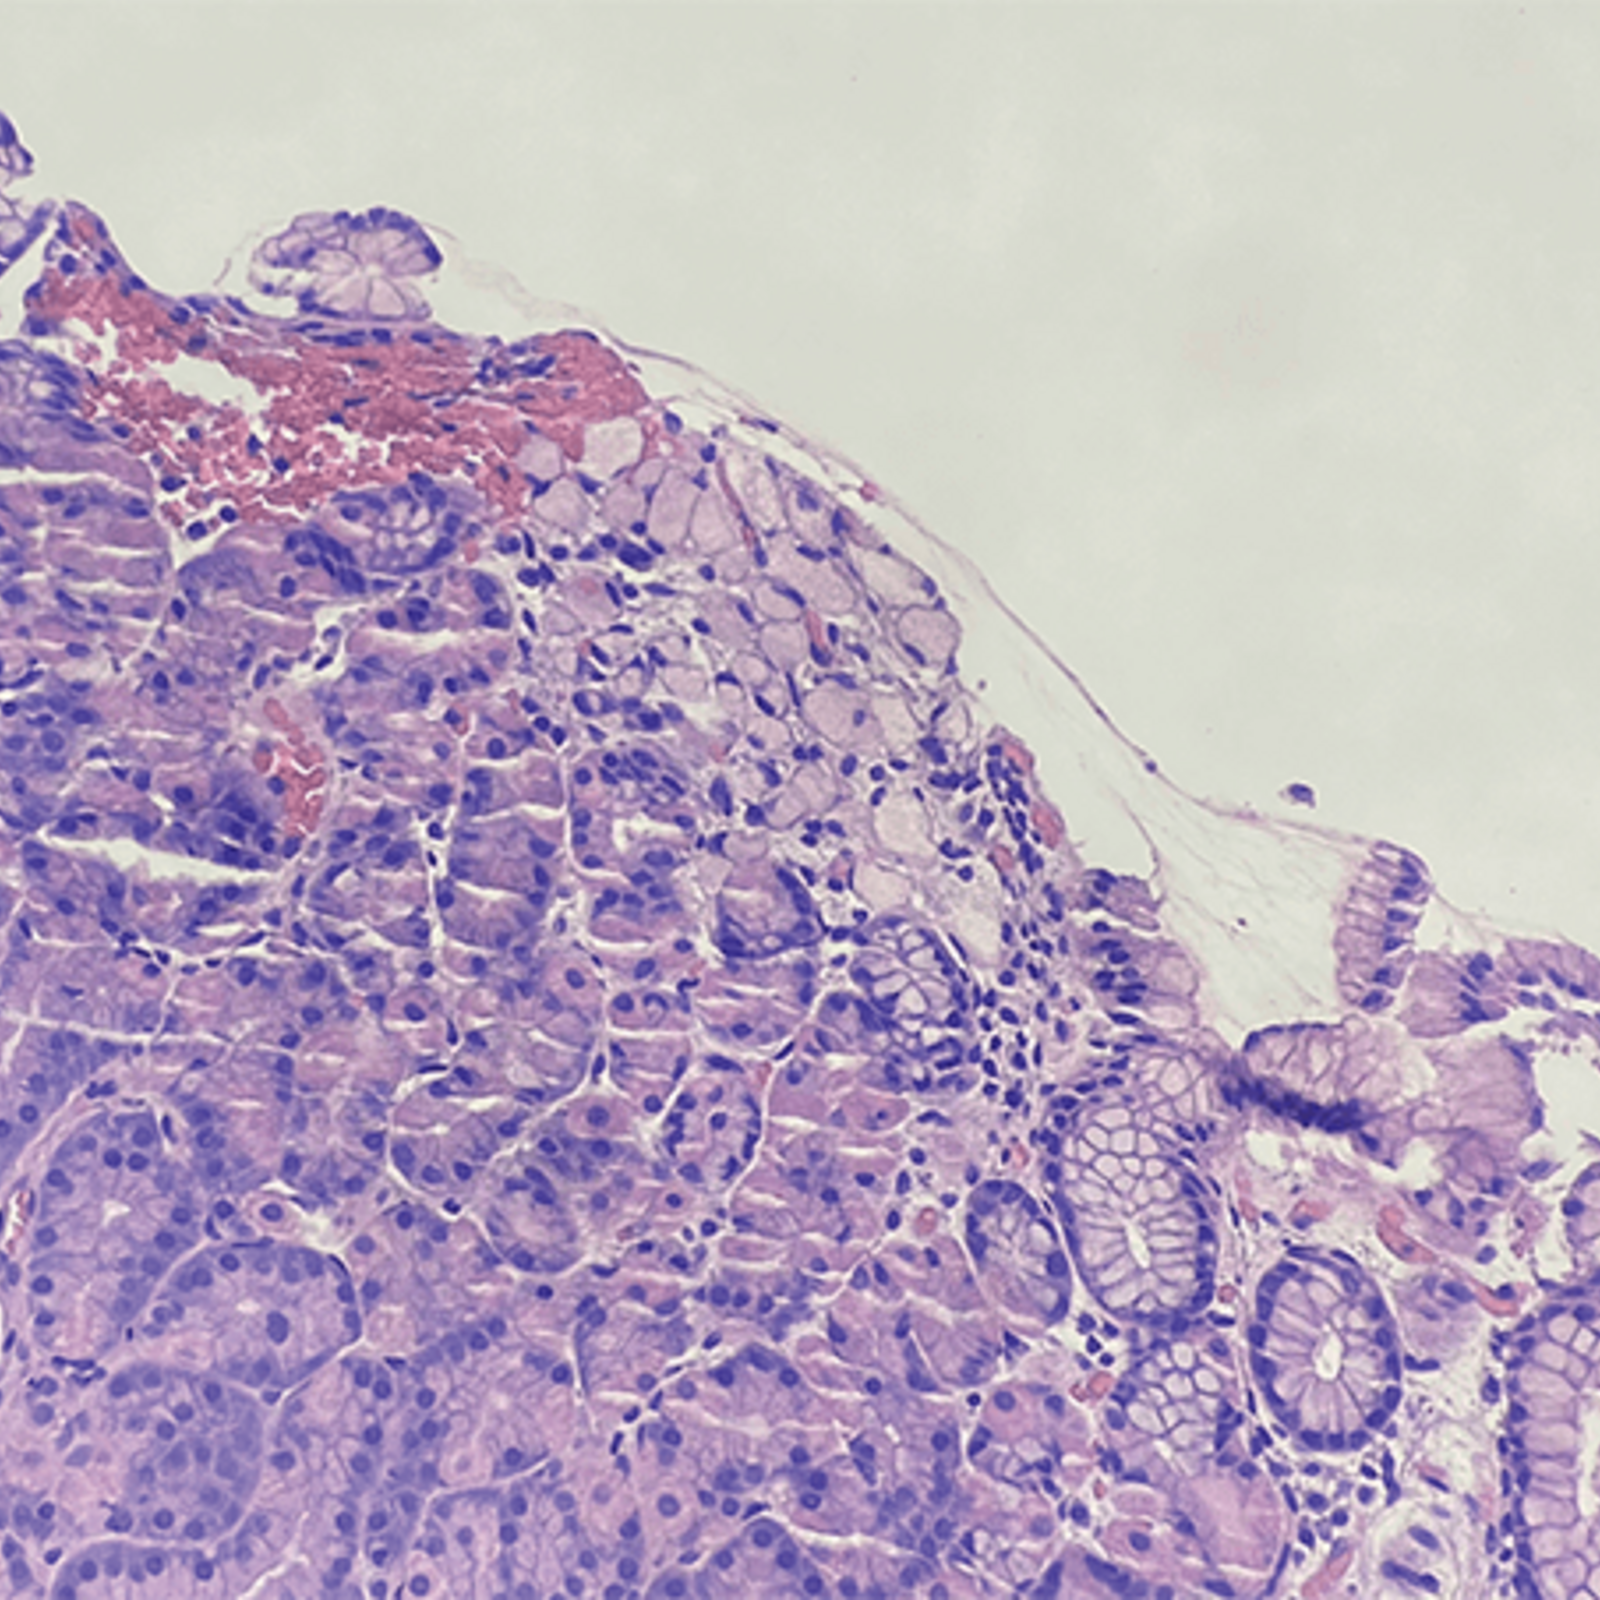 IJMS | Free Full-Text | Signet-Ring Cell Squamous Cell Carcinoma: A  Biphenotypic Neoplasm of the Gastro-Esophageal Junction with Uncertain  Biological Potential: Case Report and Literature Review